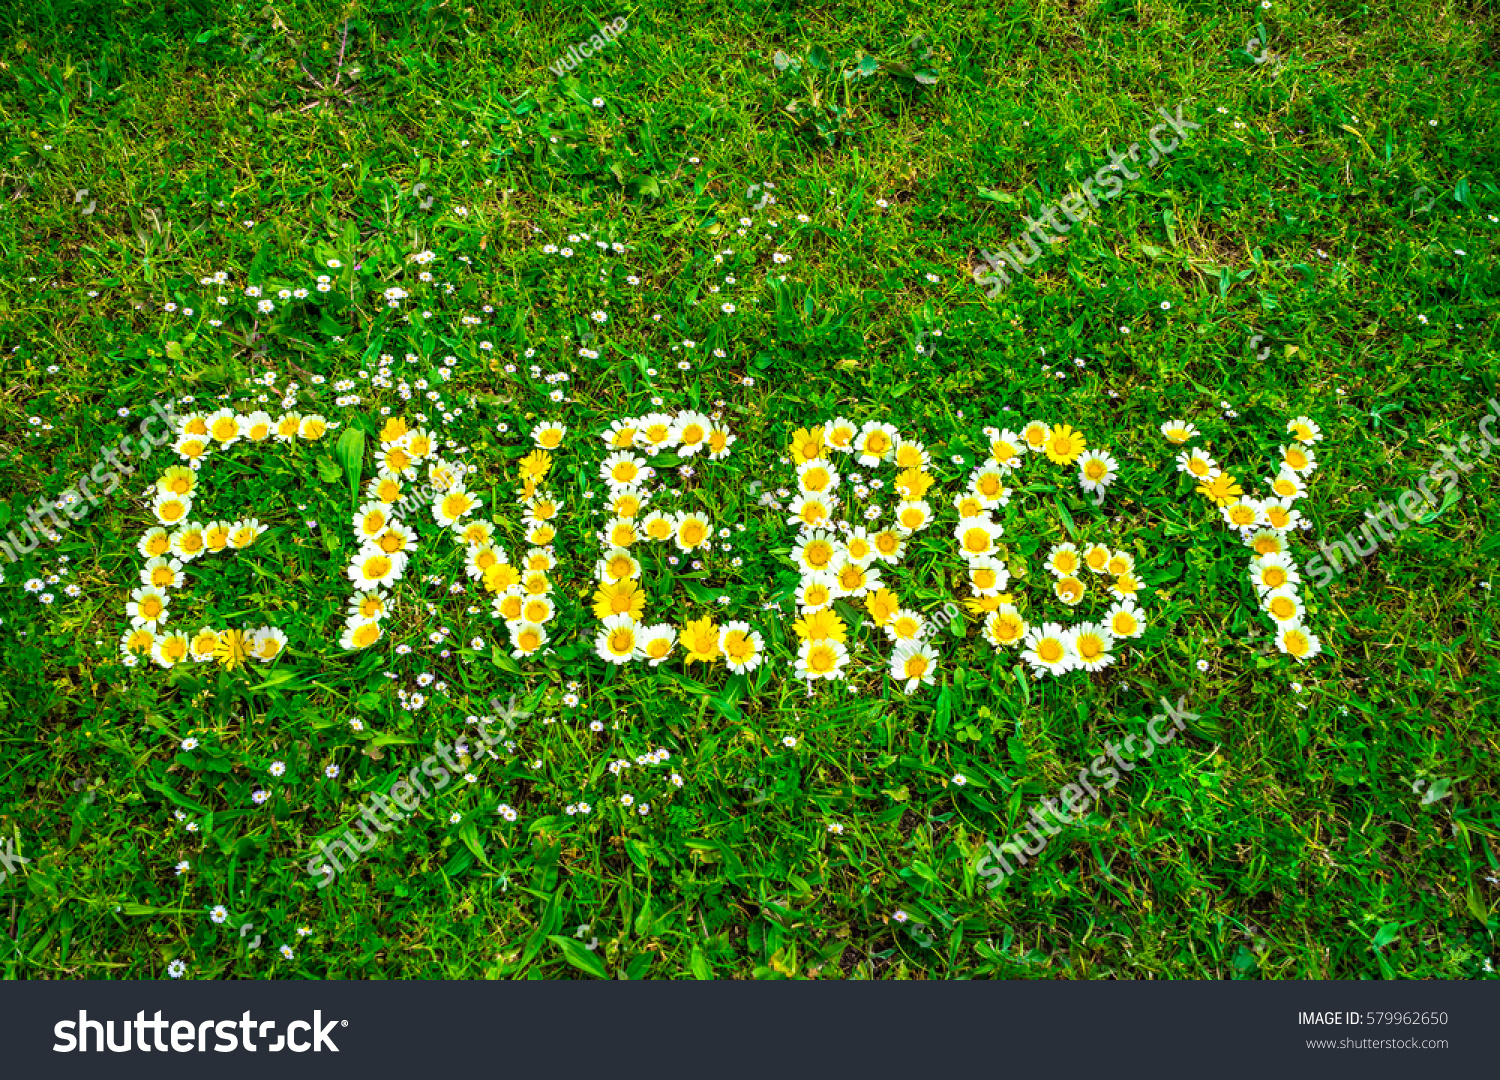 Energy word text written with flowers in green fresh grass background. #579962650